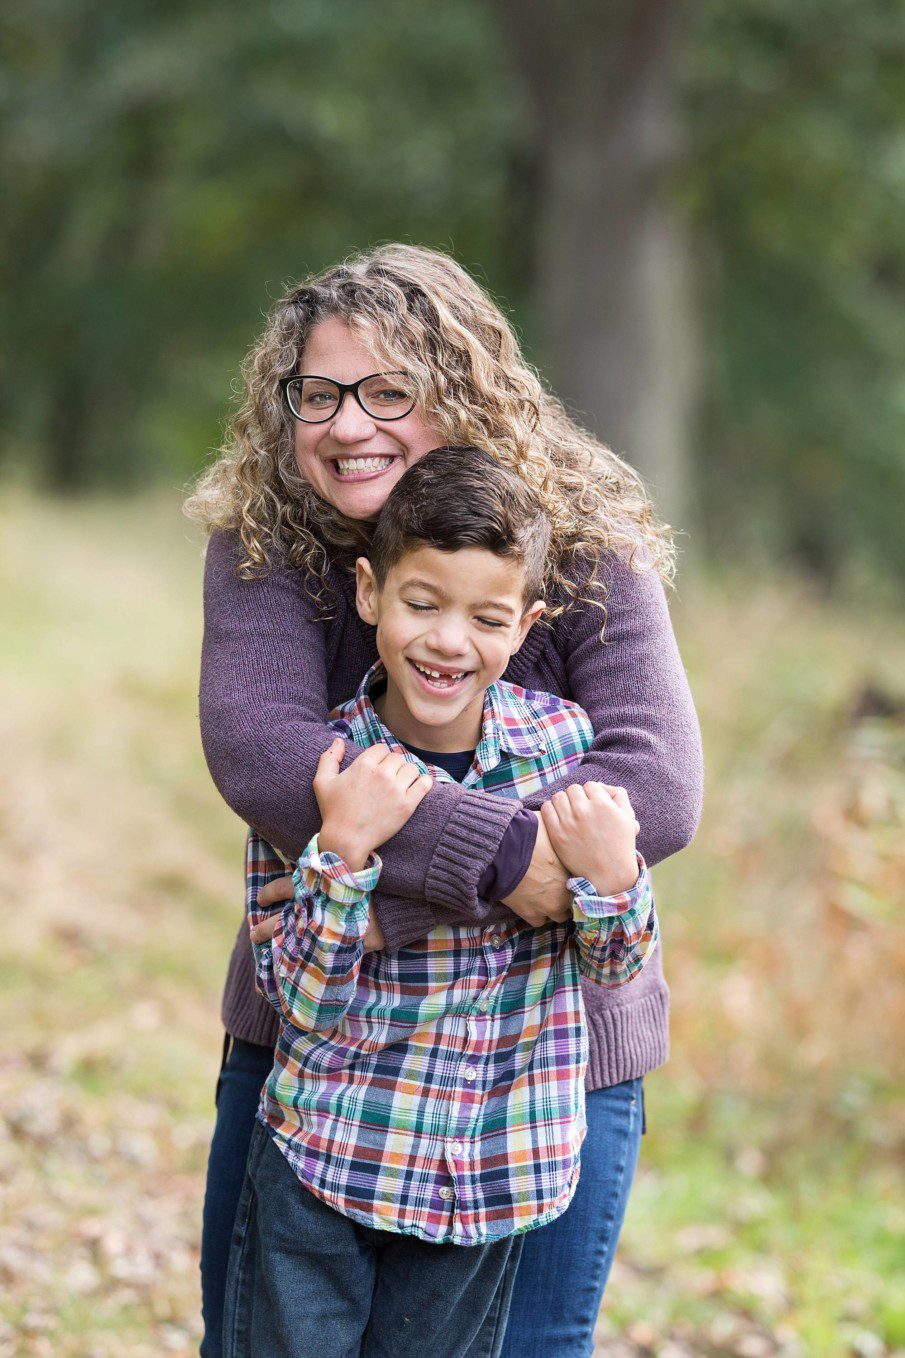 image of a mother hugging her young son.  The boy is in front and grinning with his eyes closed.  Mom is standing behind with her arms wrapped around his shoulders.  She's looking at the camera, smiling.  They're in a park in the fall.